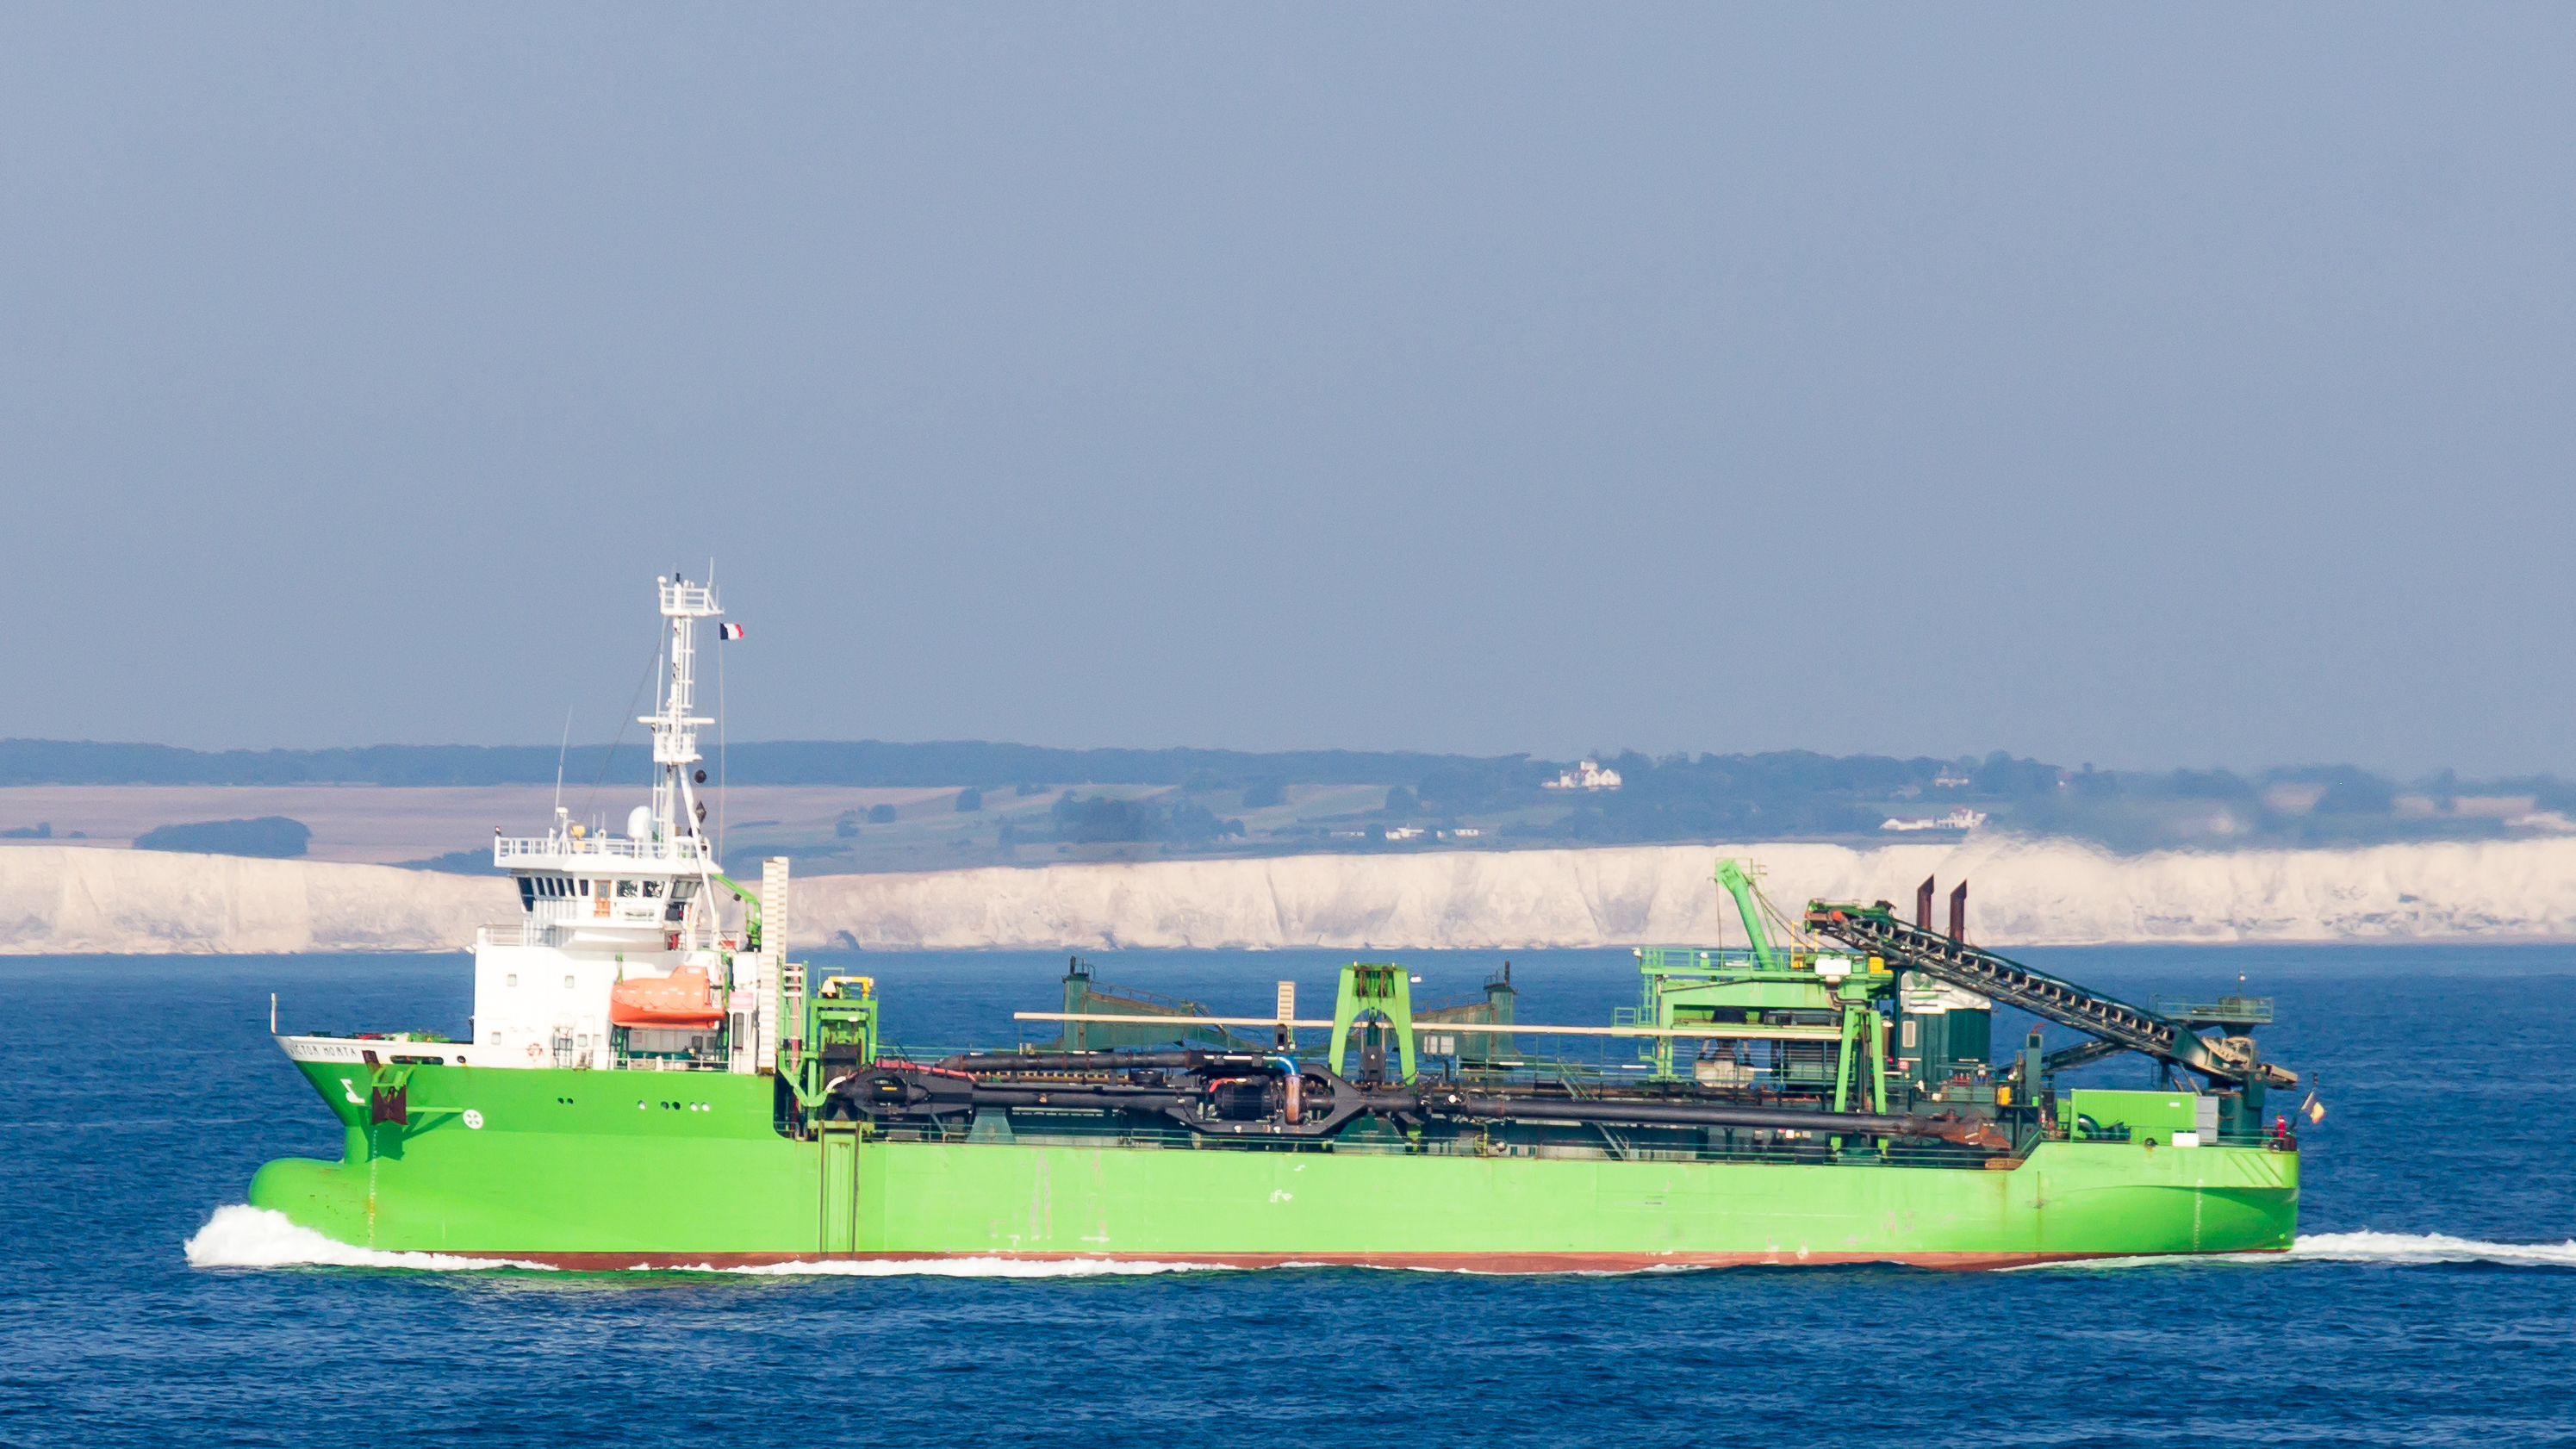 Hopper dredger Victor Horta (IMO 9525704) off the coast of the White Cliffs of Dover-3849